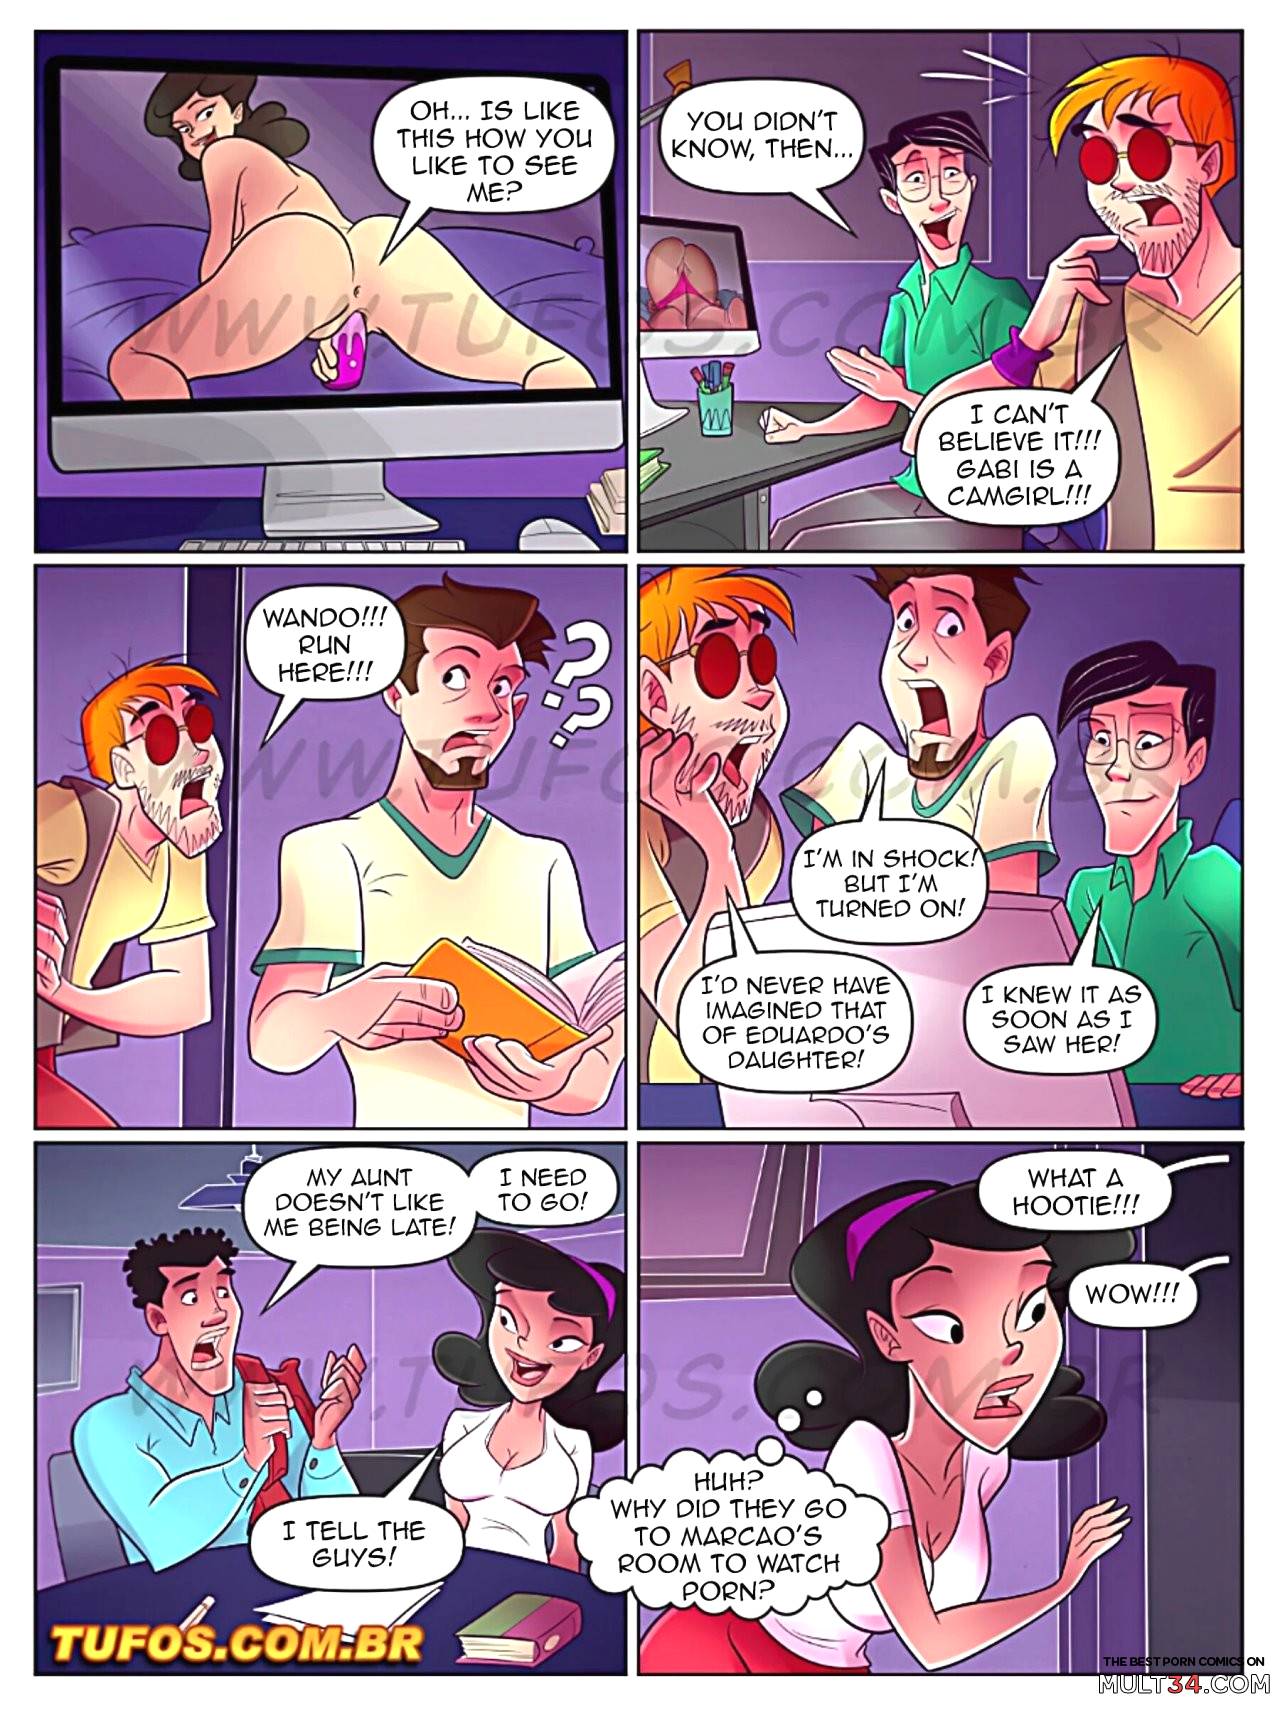 The Dick Neighborhood 2 –The student community page 4